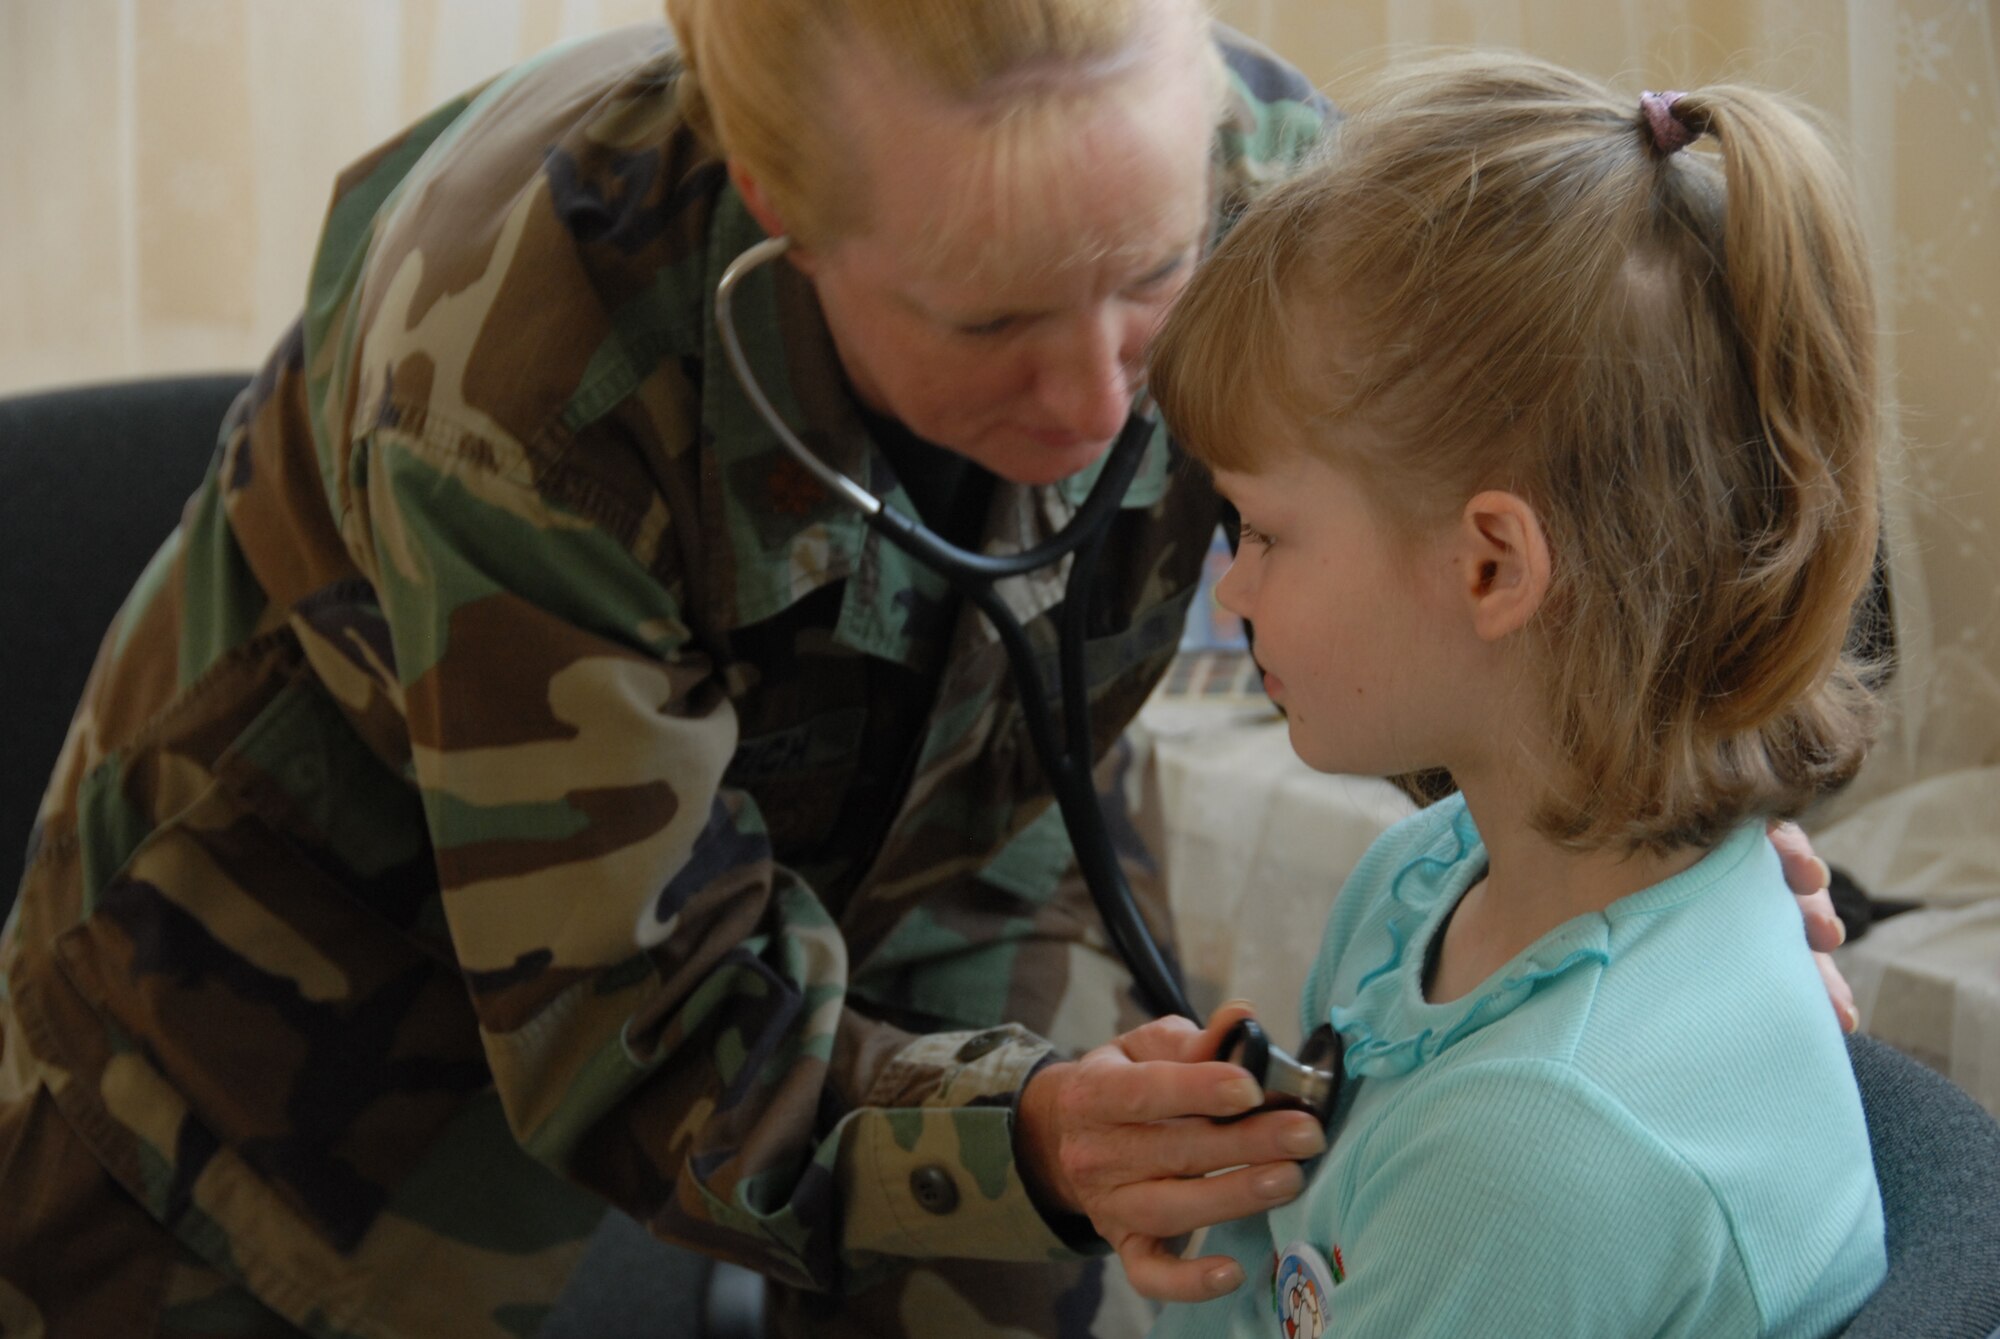 Major Laura Svinarich, 127th Medical Group physician assistant, deployed with 25 other Michigan Air National Guardsmen to Latvia in June as part of a medical support team that  visited the Priedite #2 Childrens center on June 17, 2008 in Daugavpils, Latvia.  